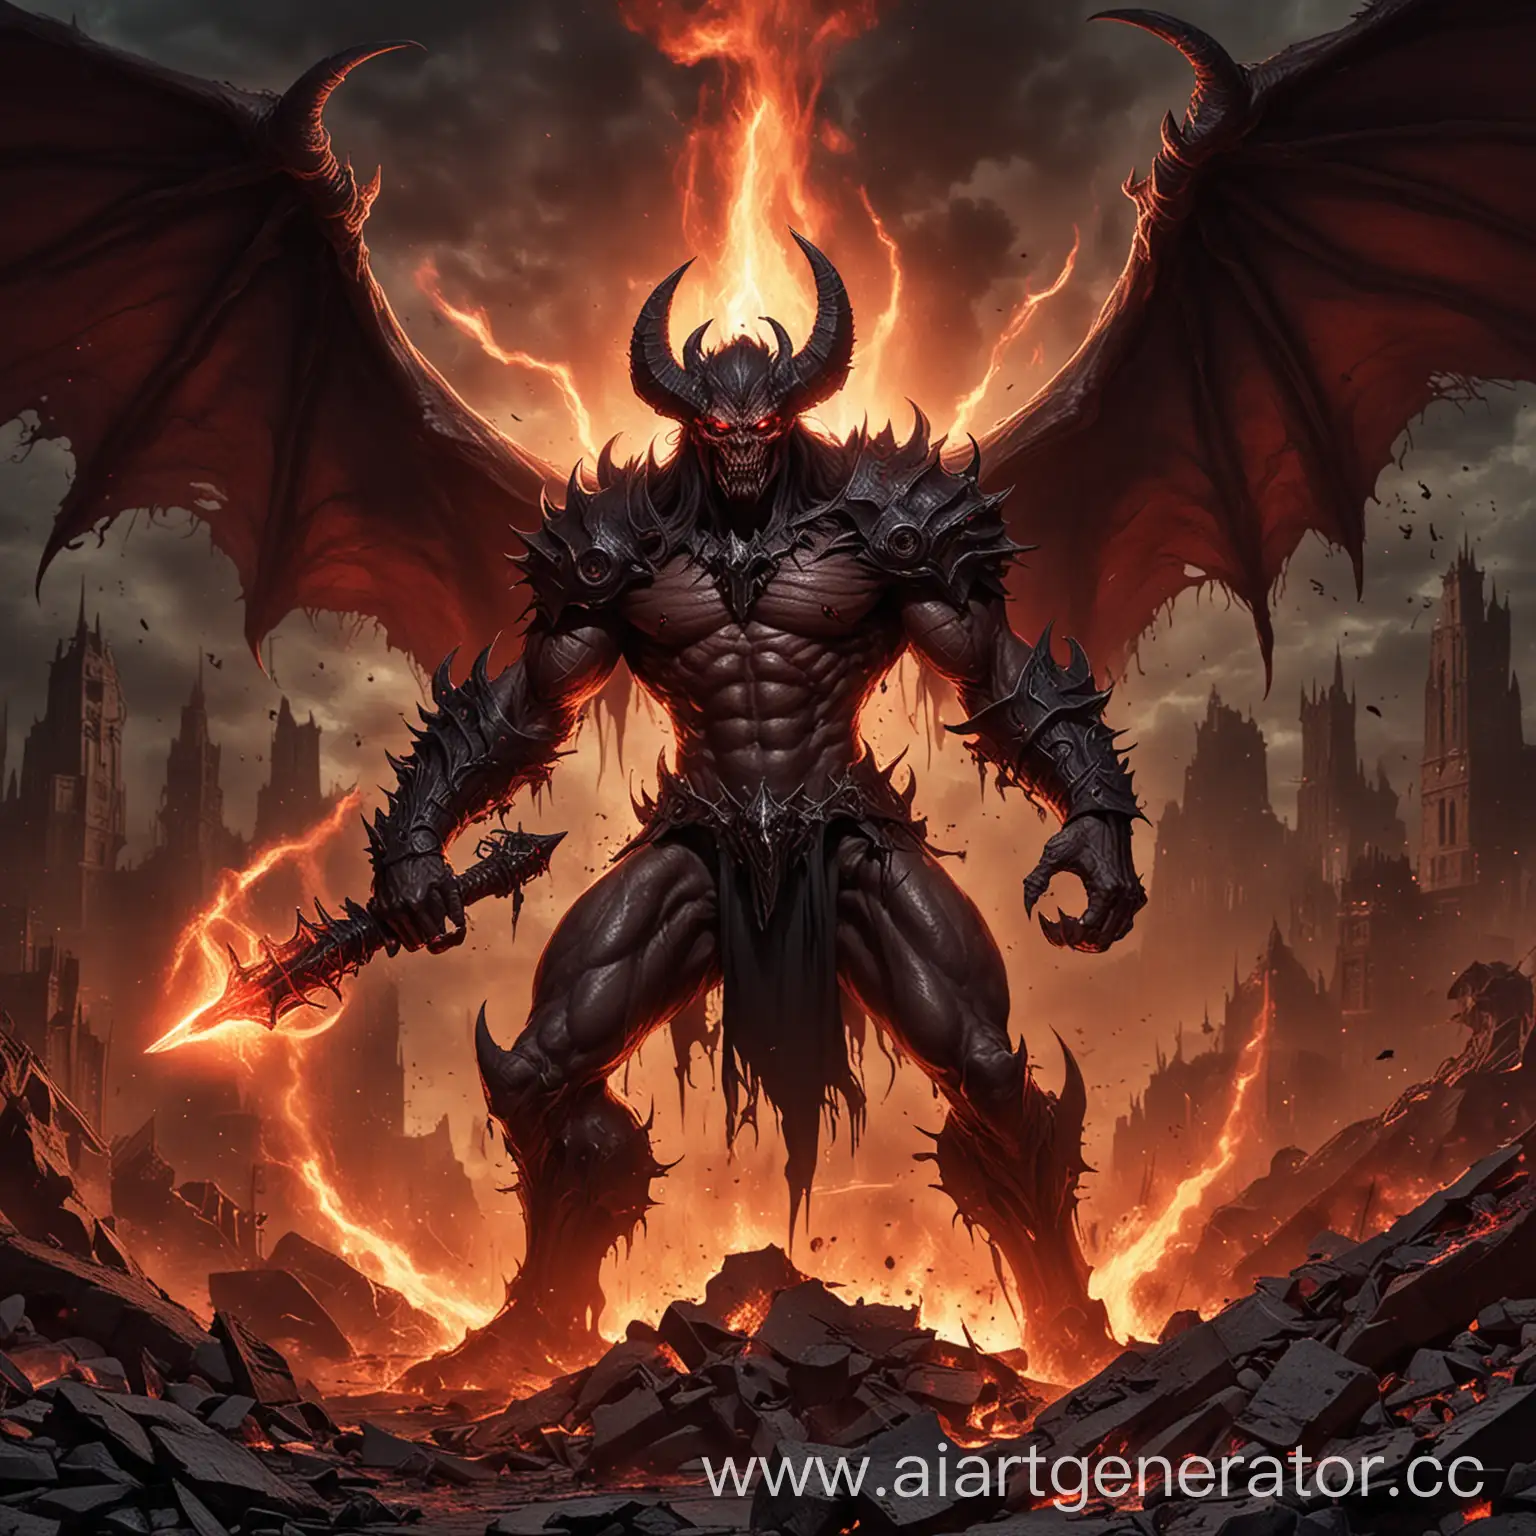 Mystical-Warrior-Battling-Demonic-Forces-in-Fiery-Abyss